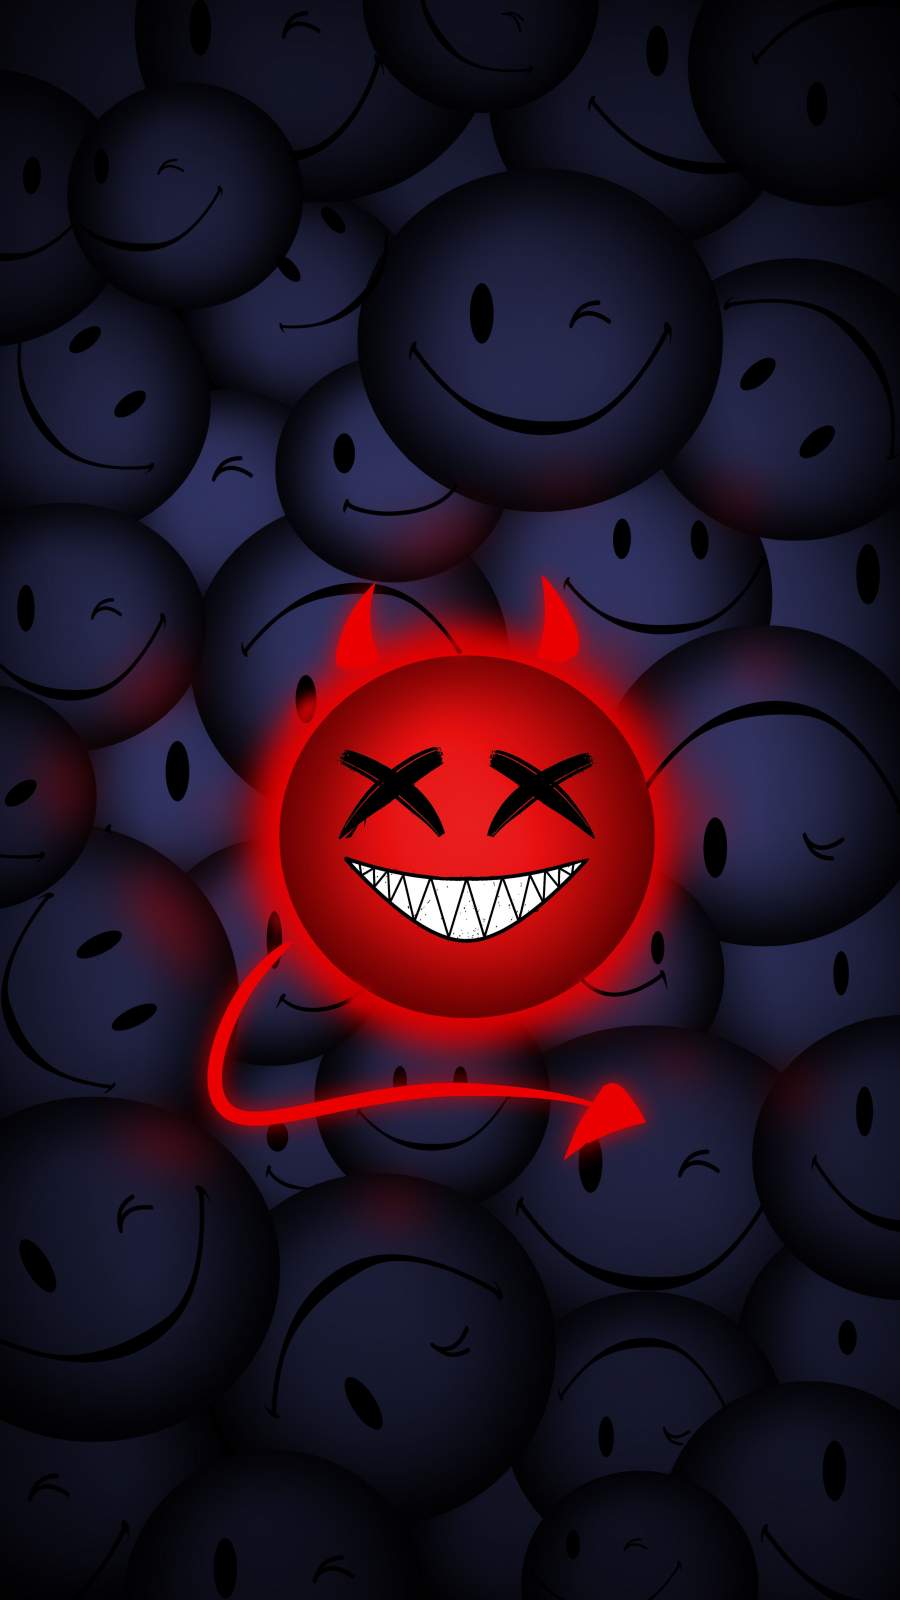 Devil Smile IPhone Wallpaper - IPhone Wallpapers : iPhone Wallpapers